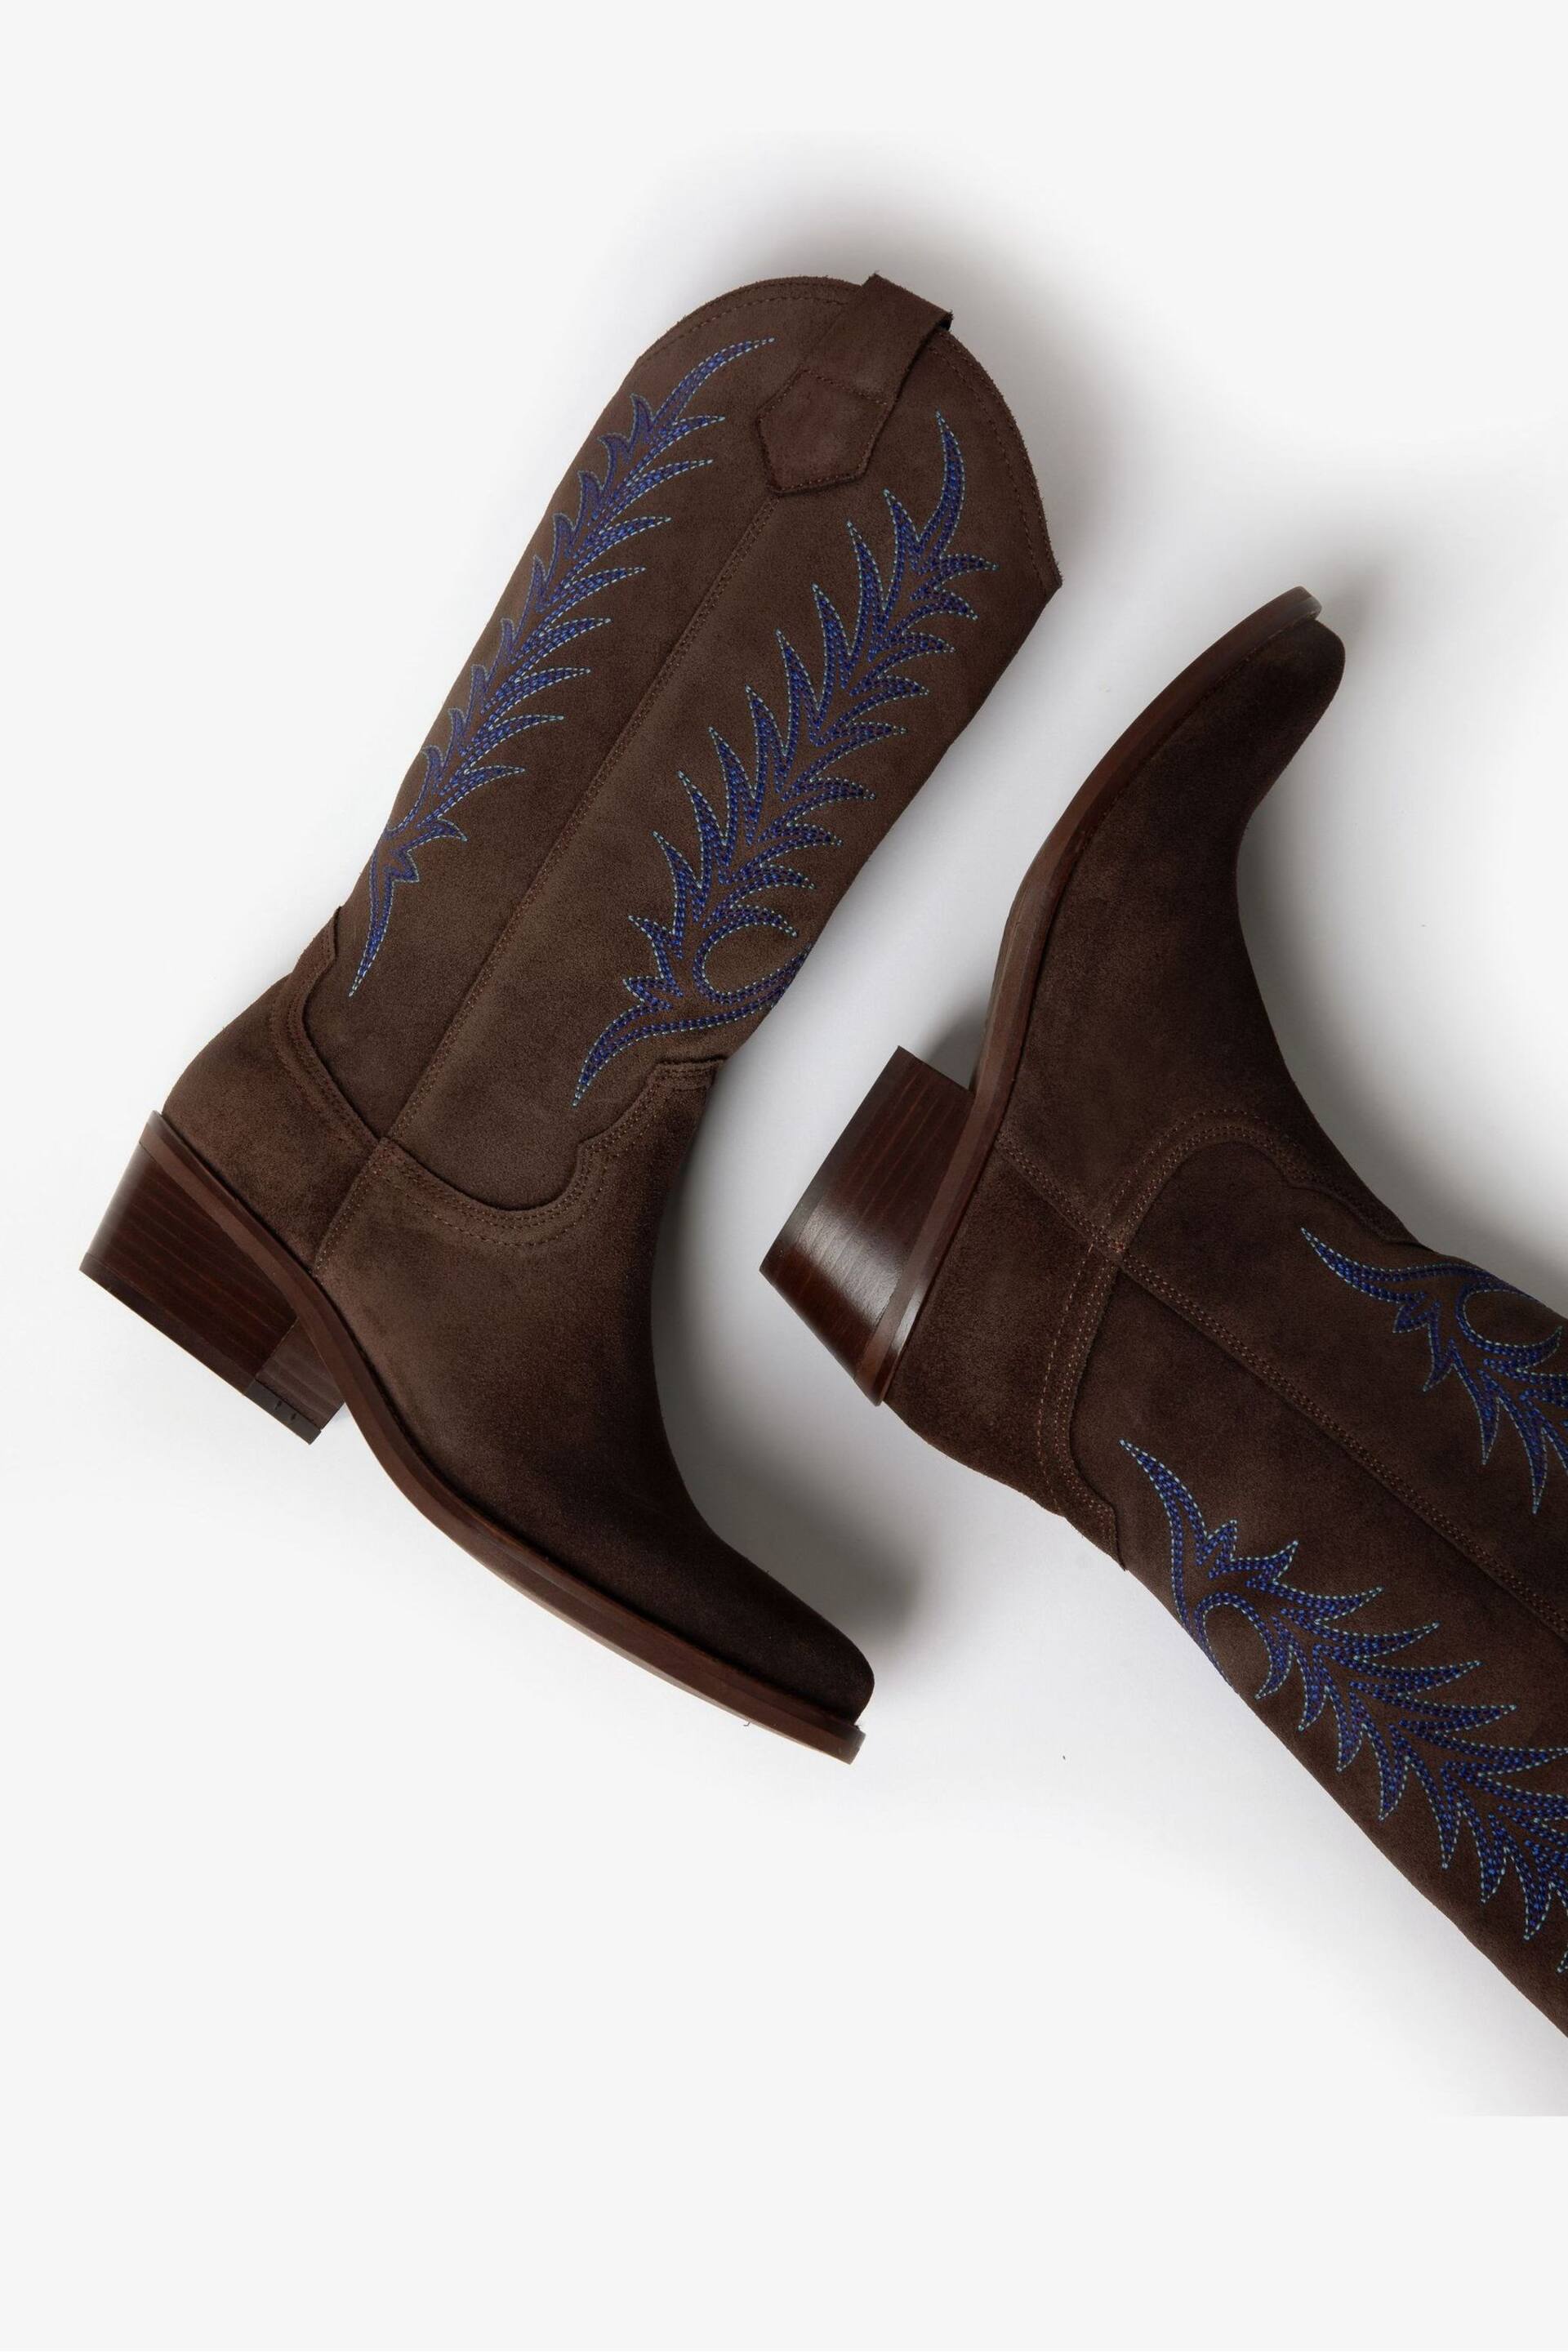 Penelope Chilvers Goldie Embroidered Cowboy Brown Boots - Image 4 of 7